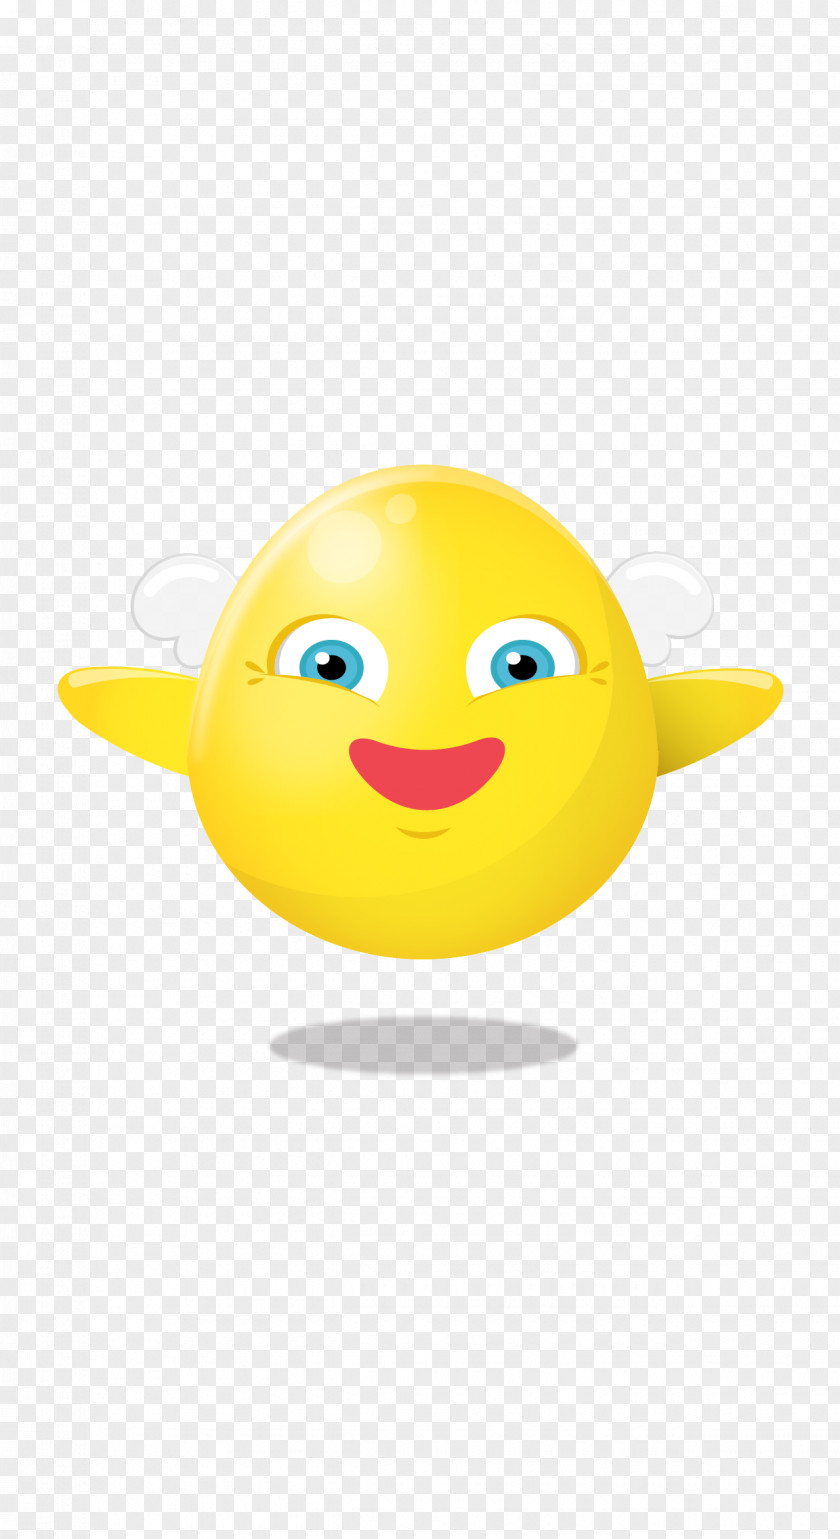 Smiley Product Design Cartoon PNG